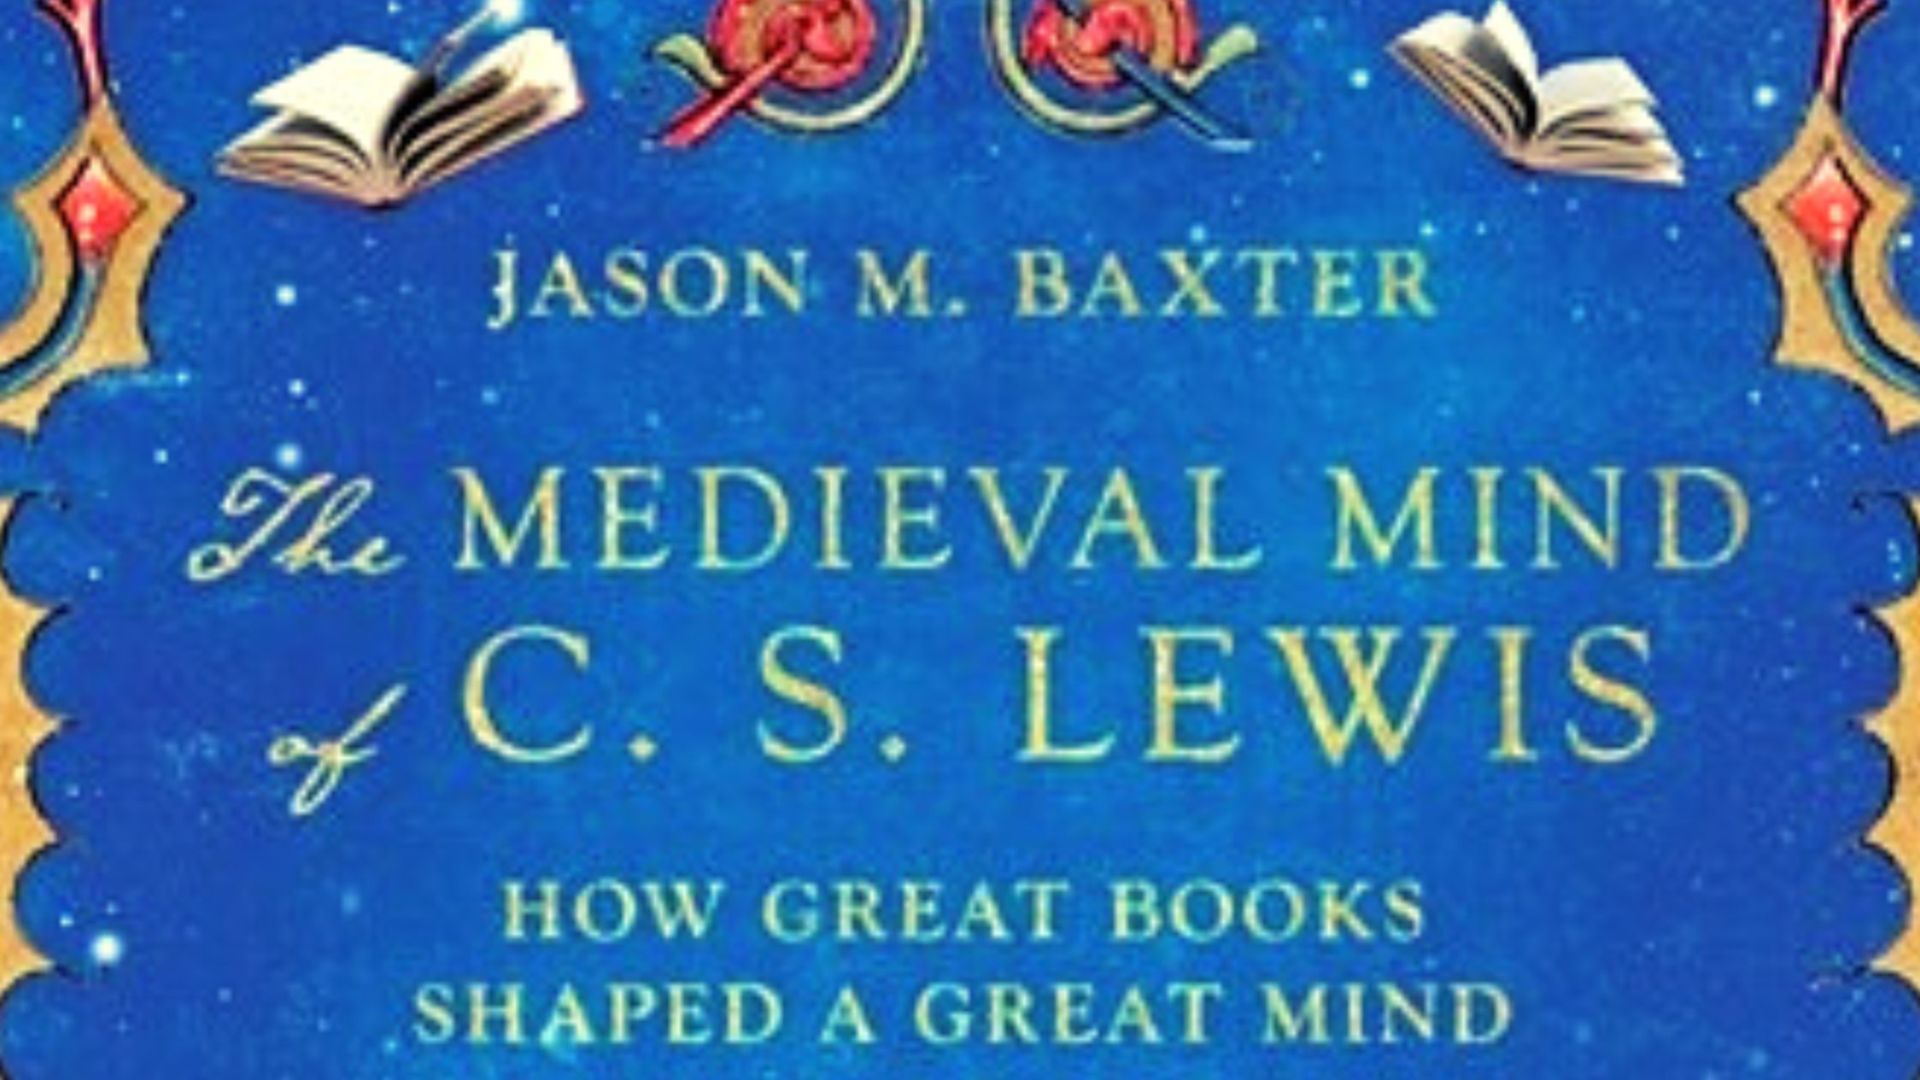 Alan Mordue reviews 'The Medieval Mind of C S Lewis'